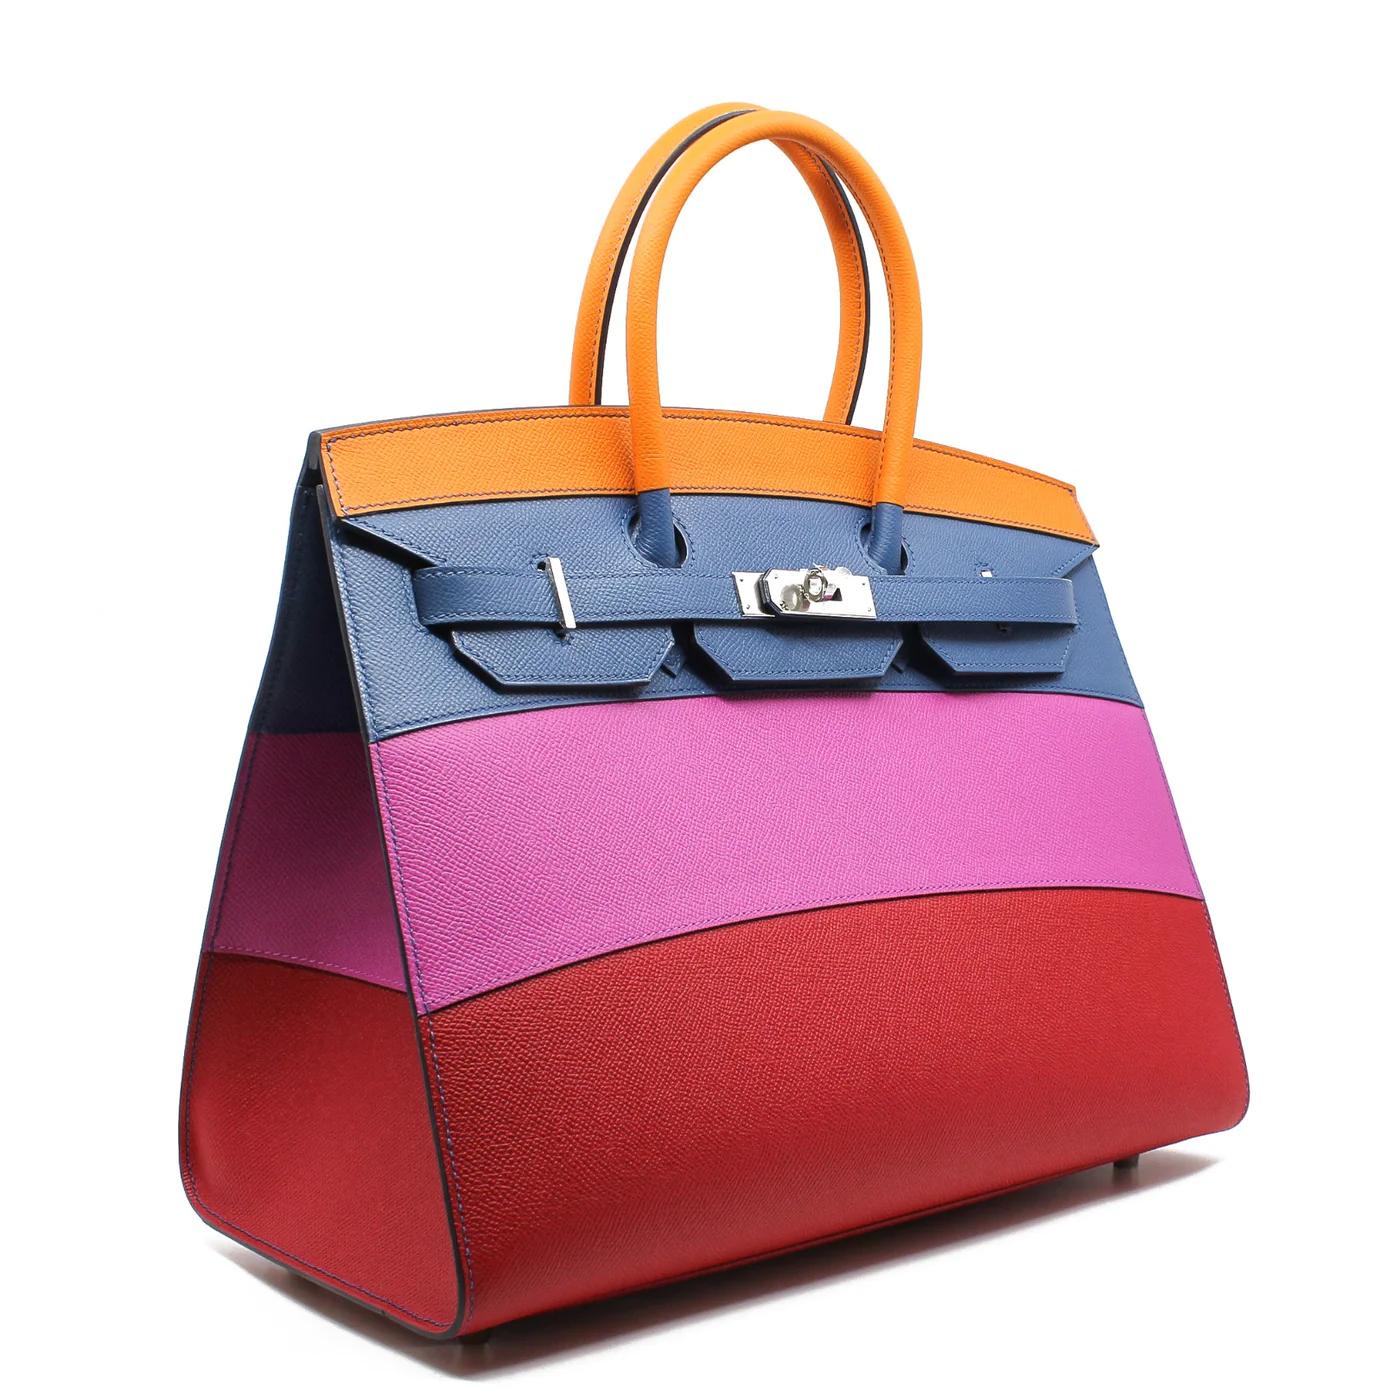 Hermes Birkin Sellier 35cm Limited Edition Rainbow In New Condition For Sale In Sydney, New South Wales